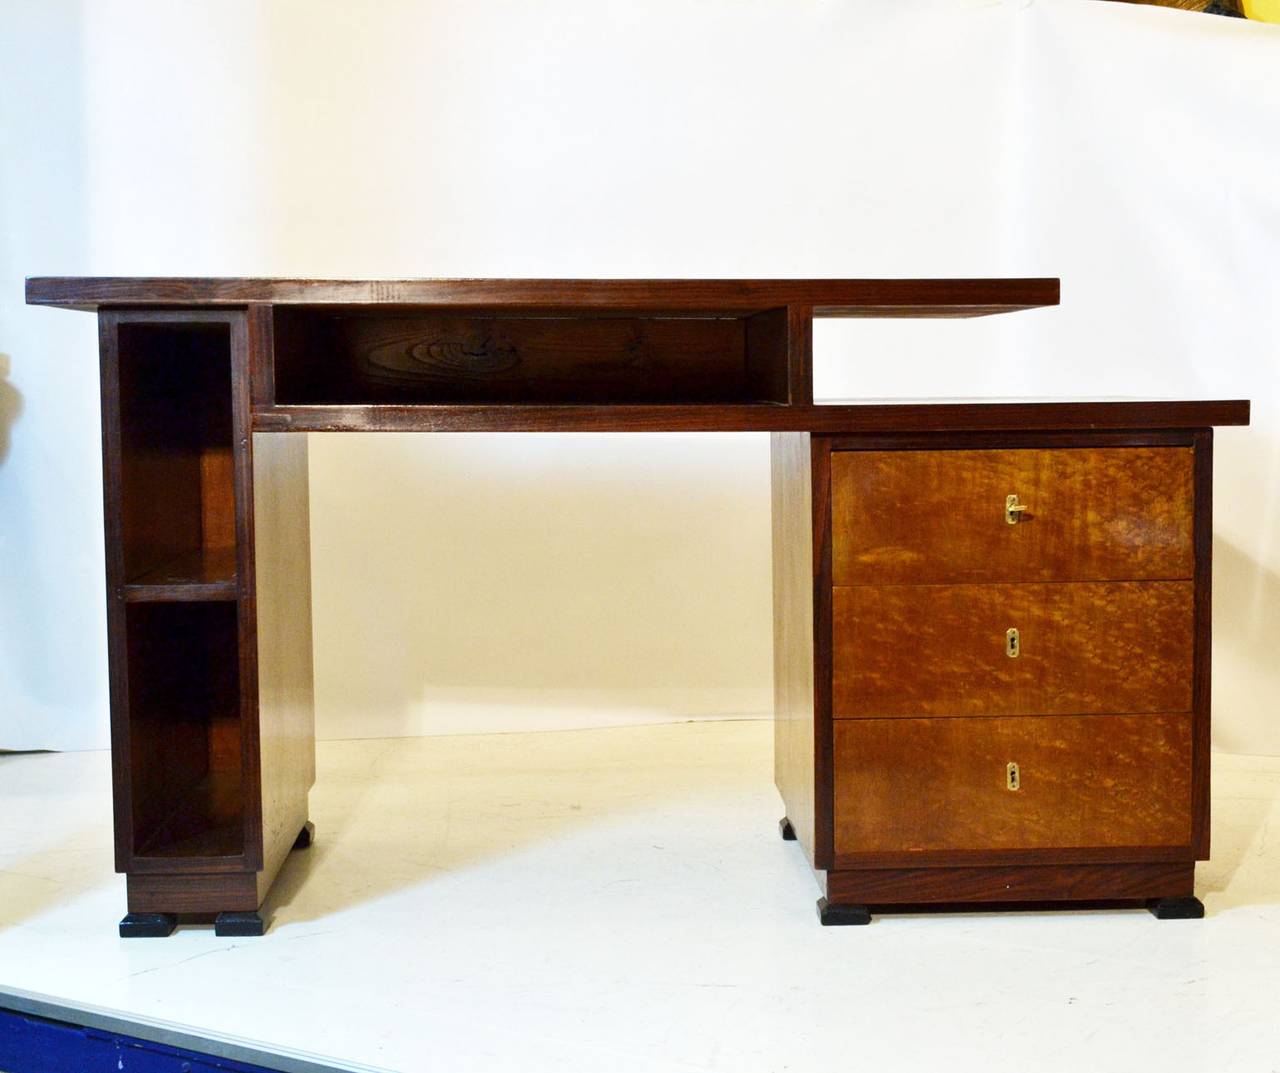 This burl figured Walnut desk is edged with  Magassar wood veneer. A good example of 'Rationalism' in Italian design of the 1920-30's.